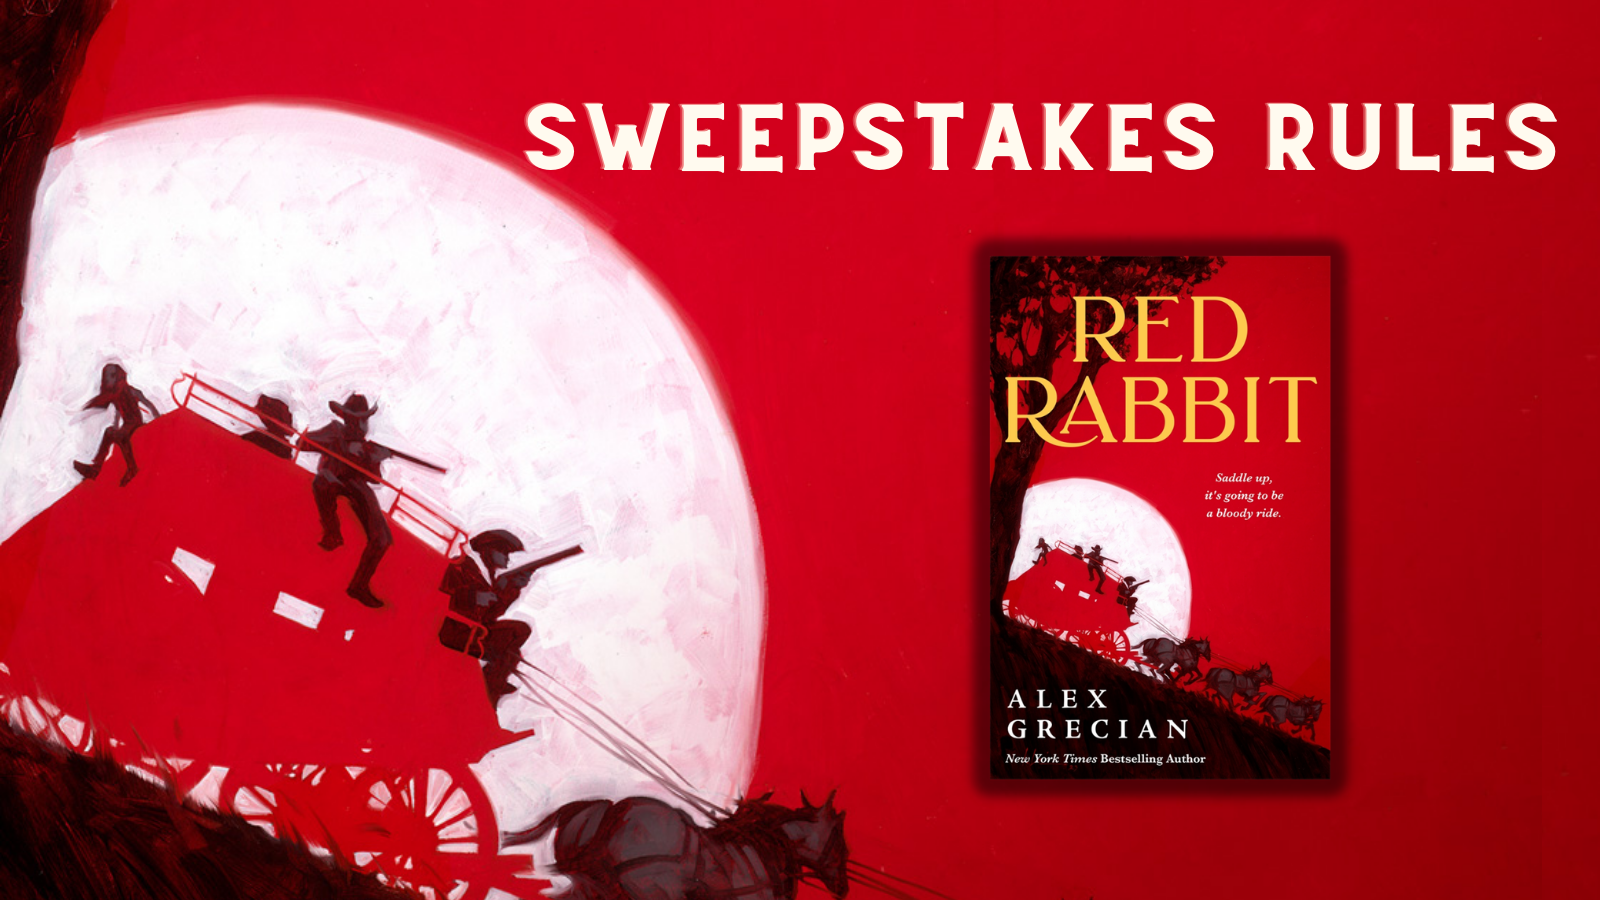 Red Rabbit Sweepstakes Rules - 980